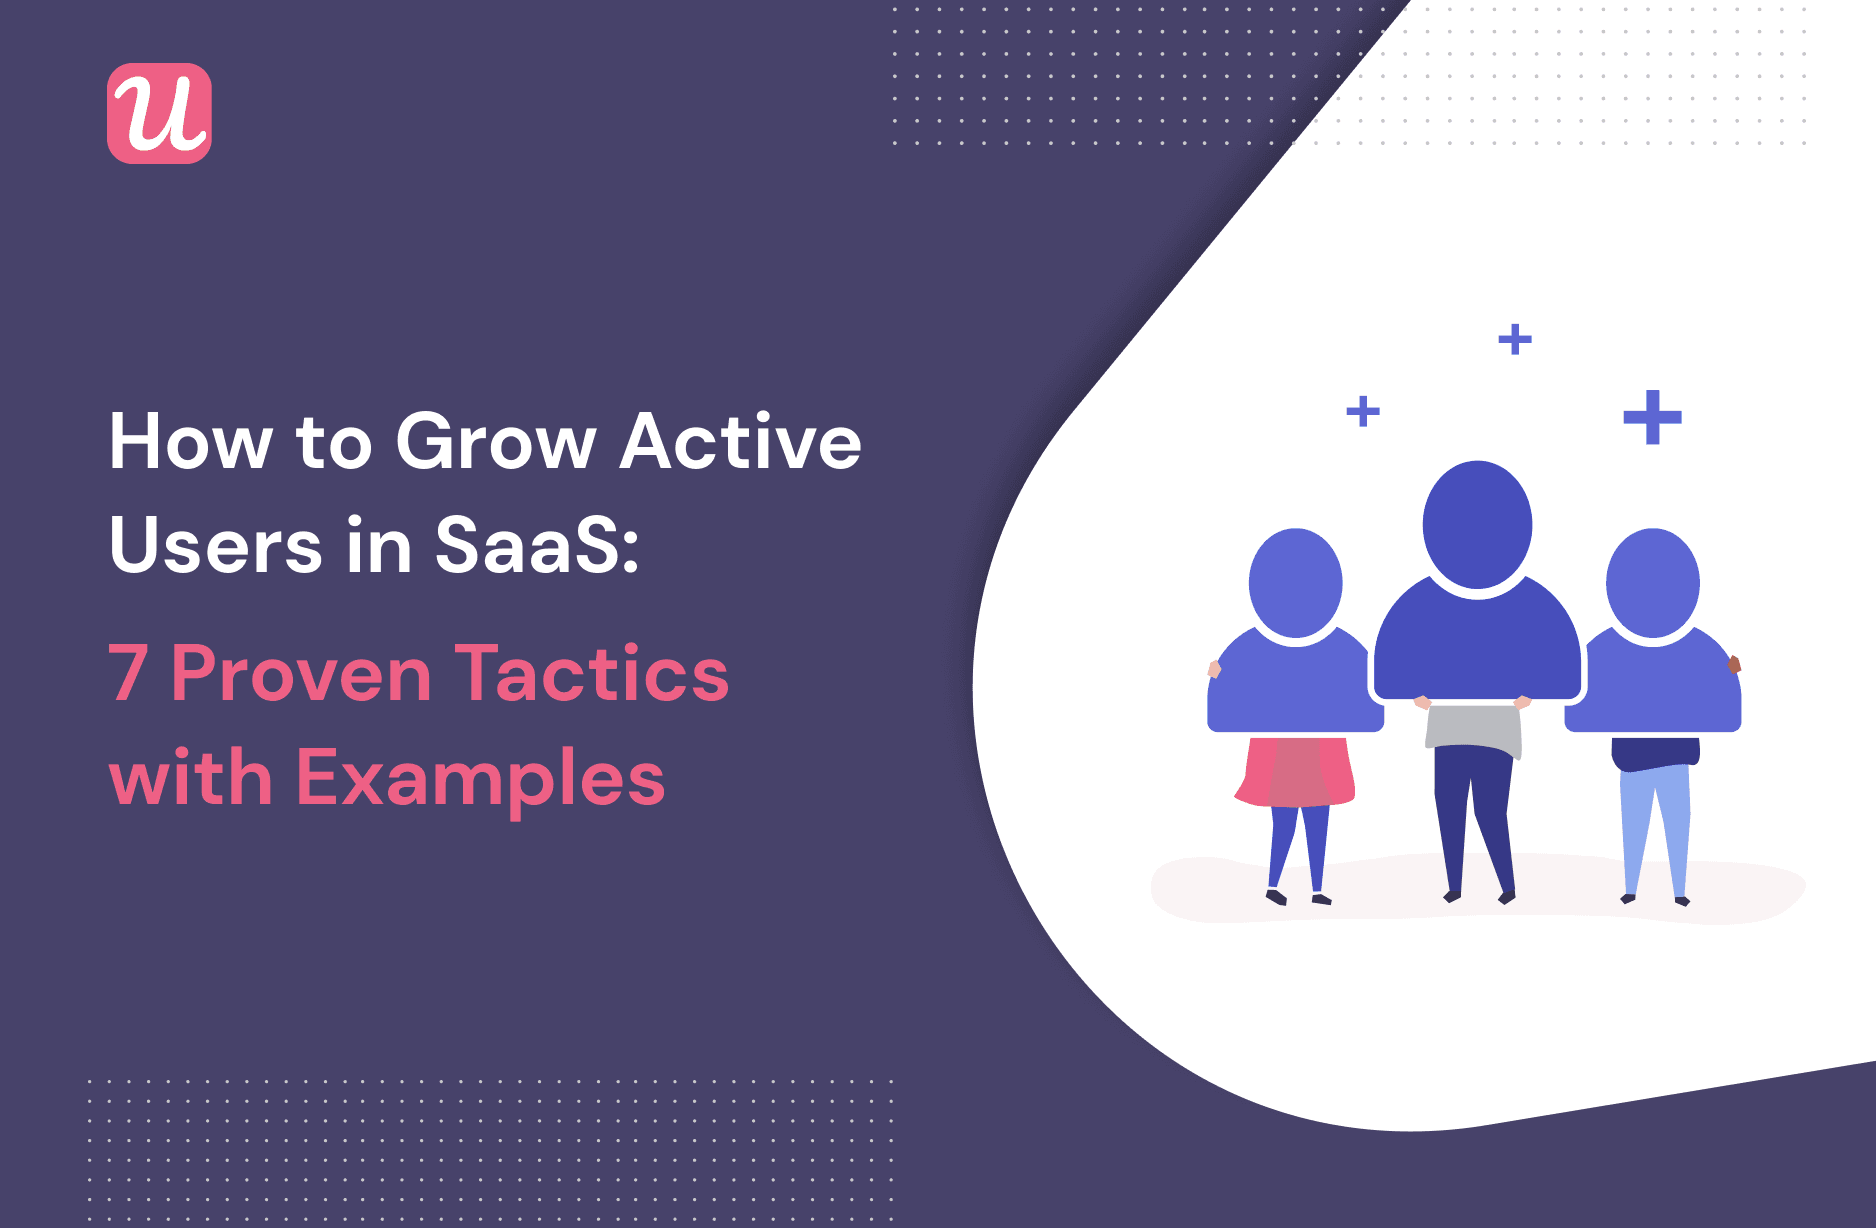 How to Grow Active Users in SaaS: 7 Proven Tactics With Examples